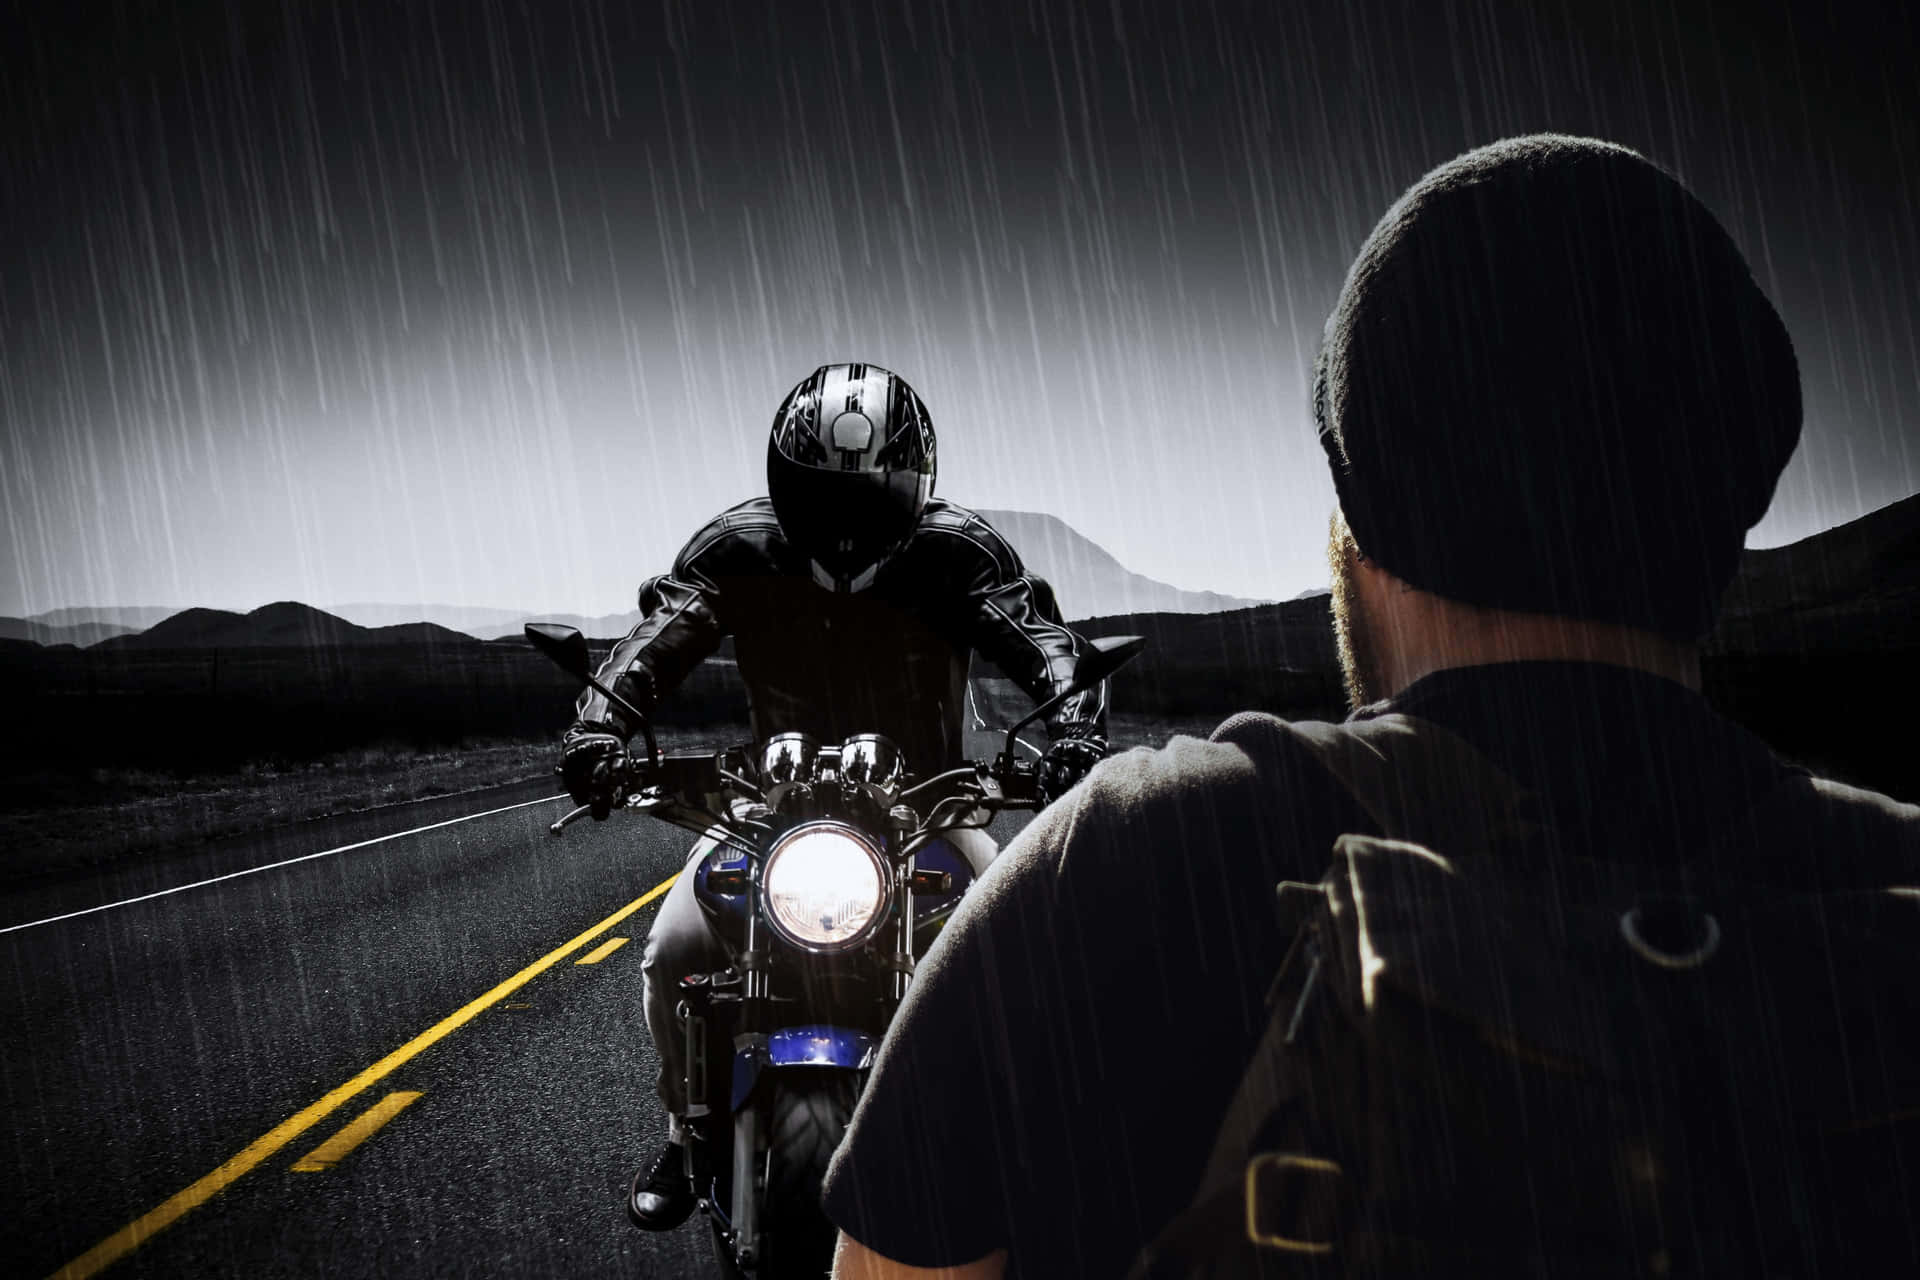 A Man Is Riding A Motorcycle In The Rain